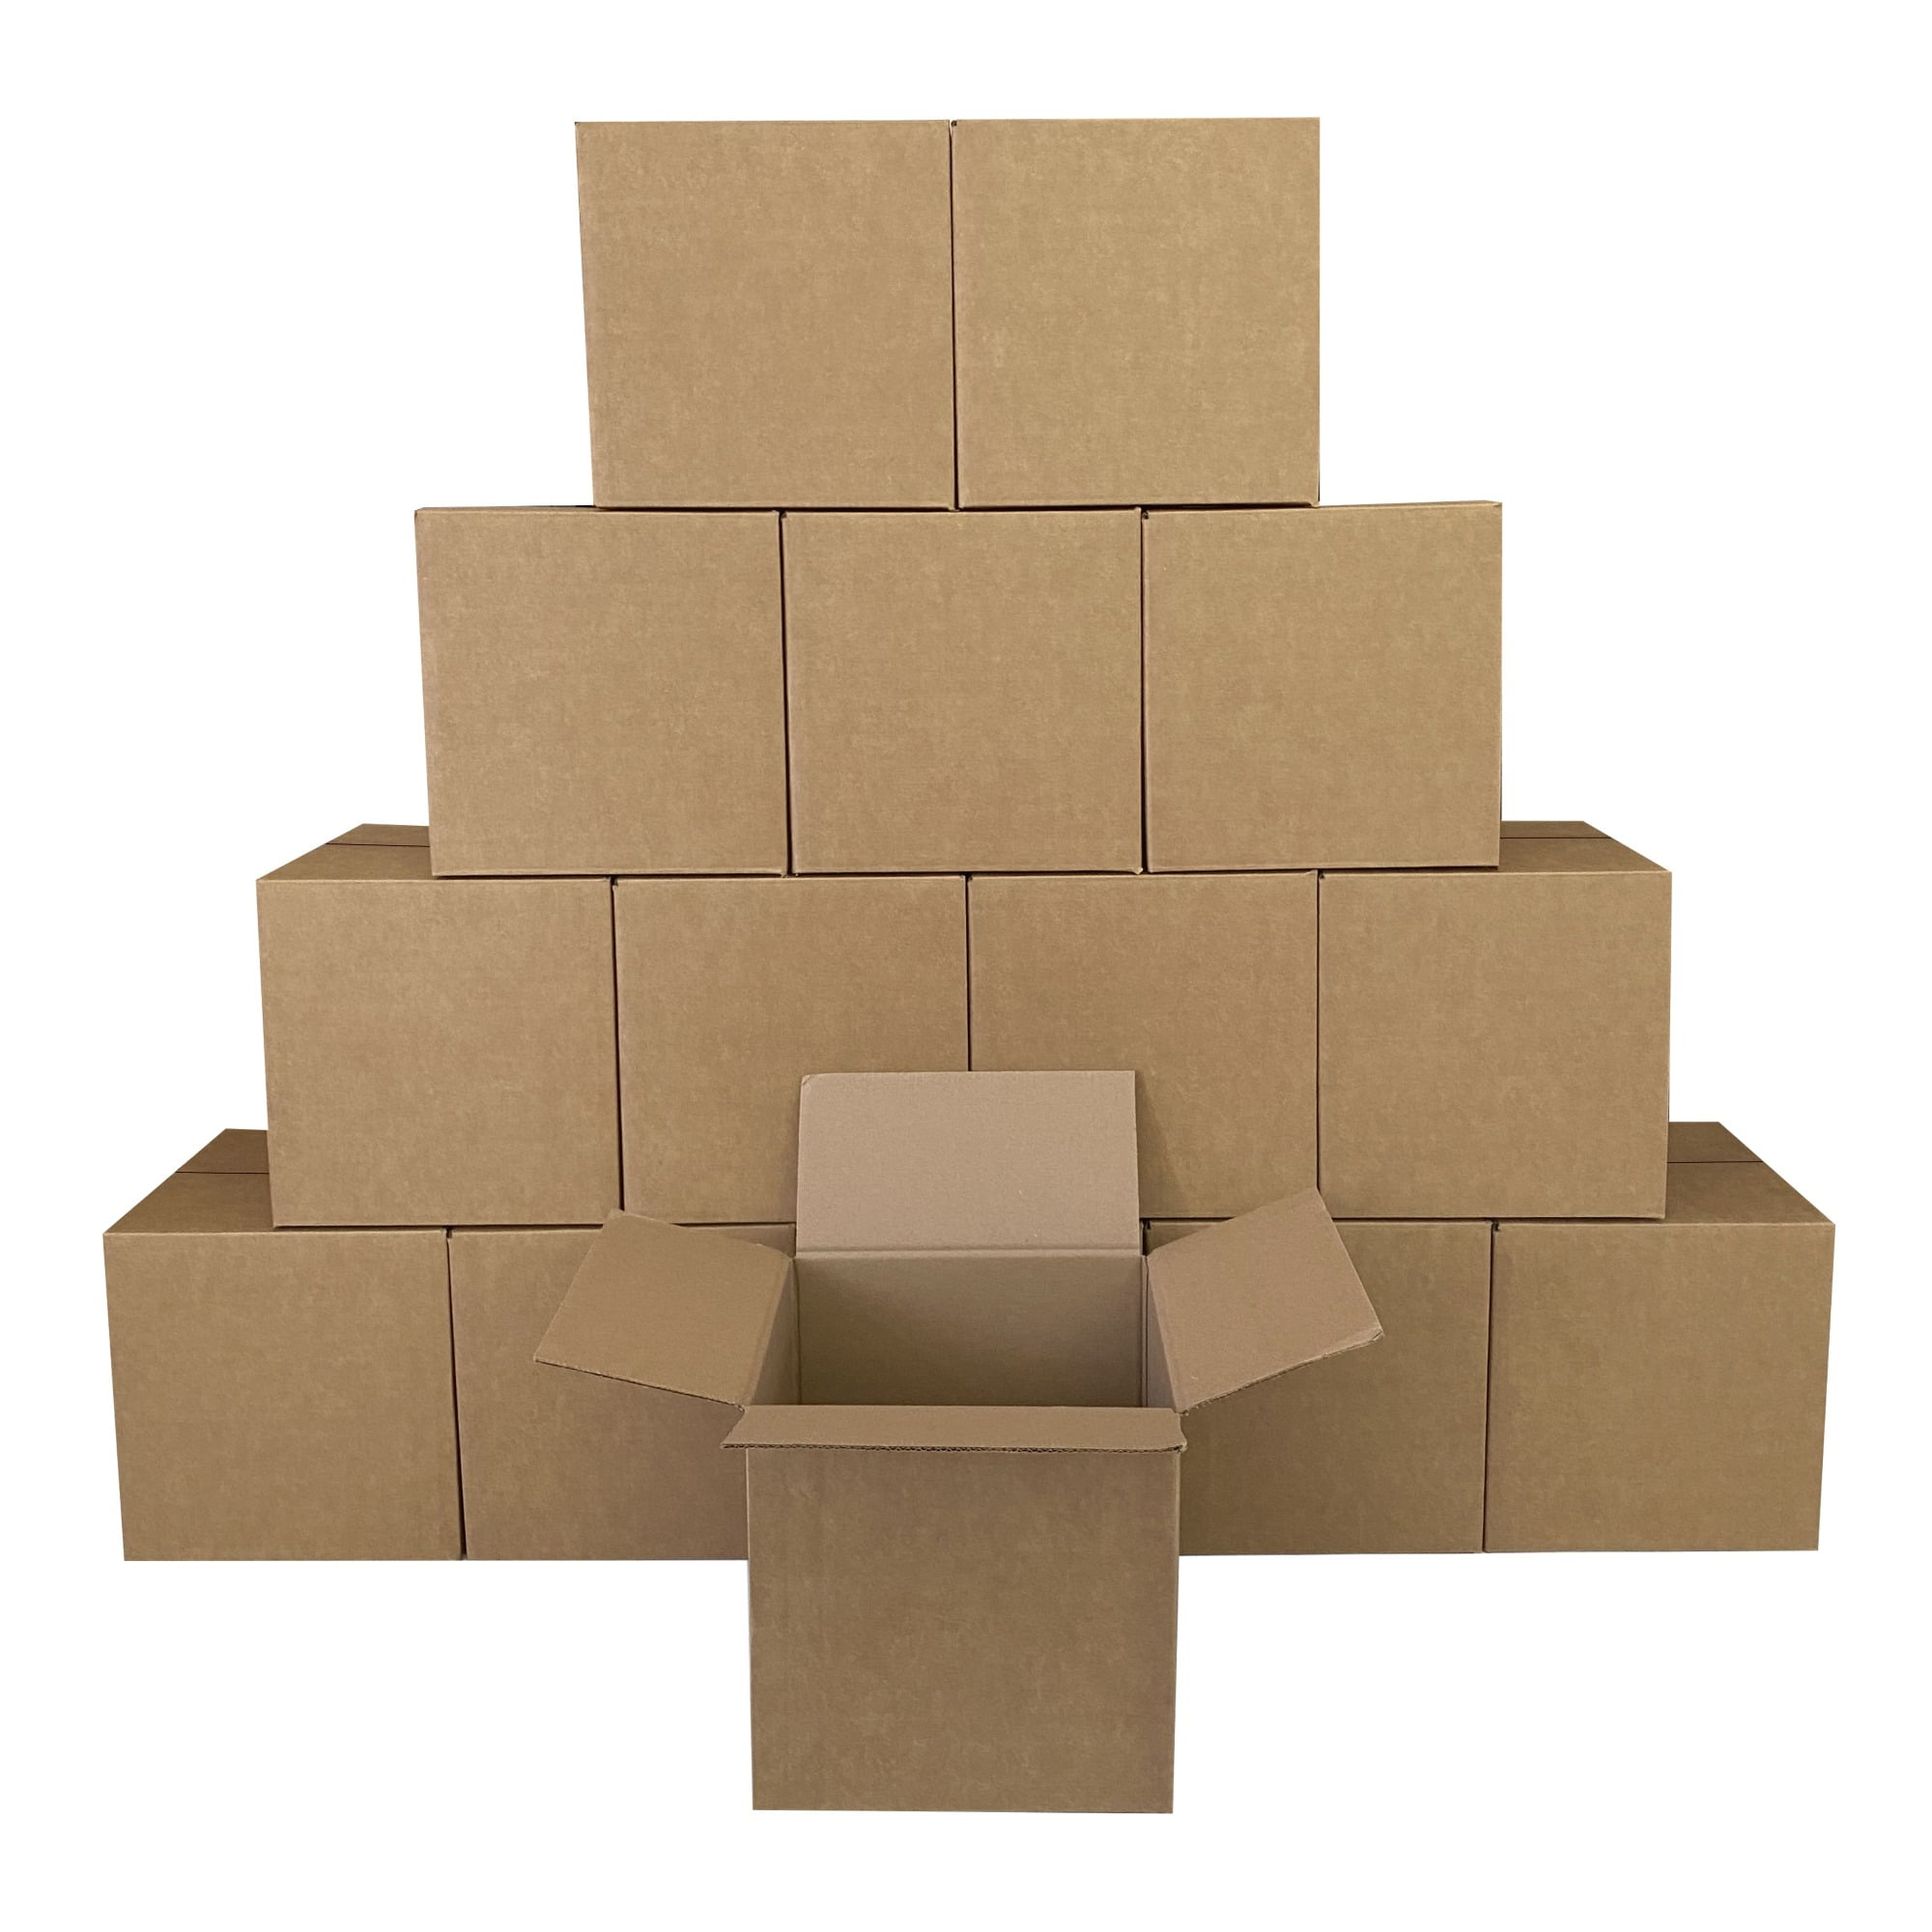 90 Brown Corrugated Cardboard Double Wall Boxes 18 x 12 x 12" 